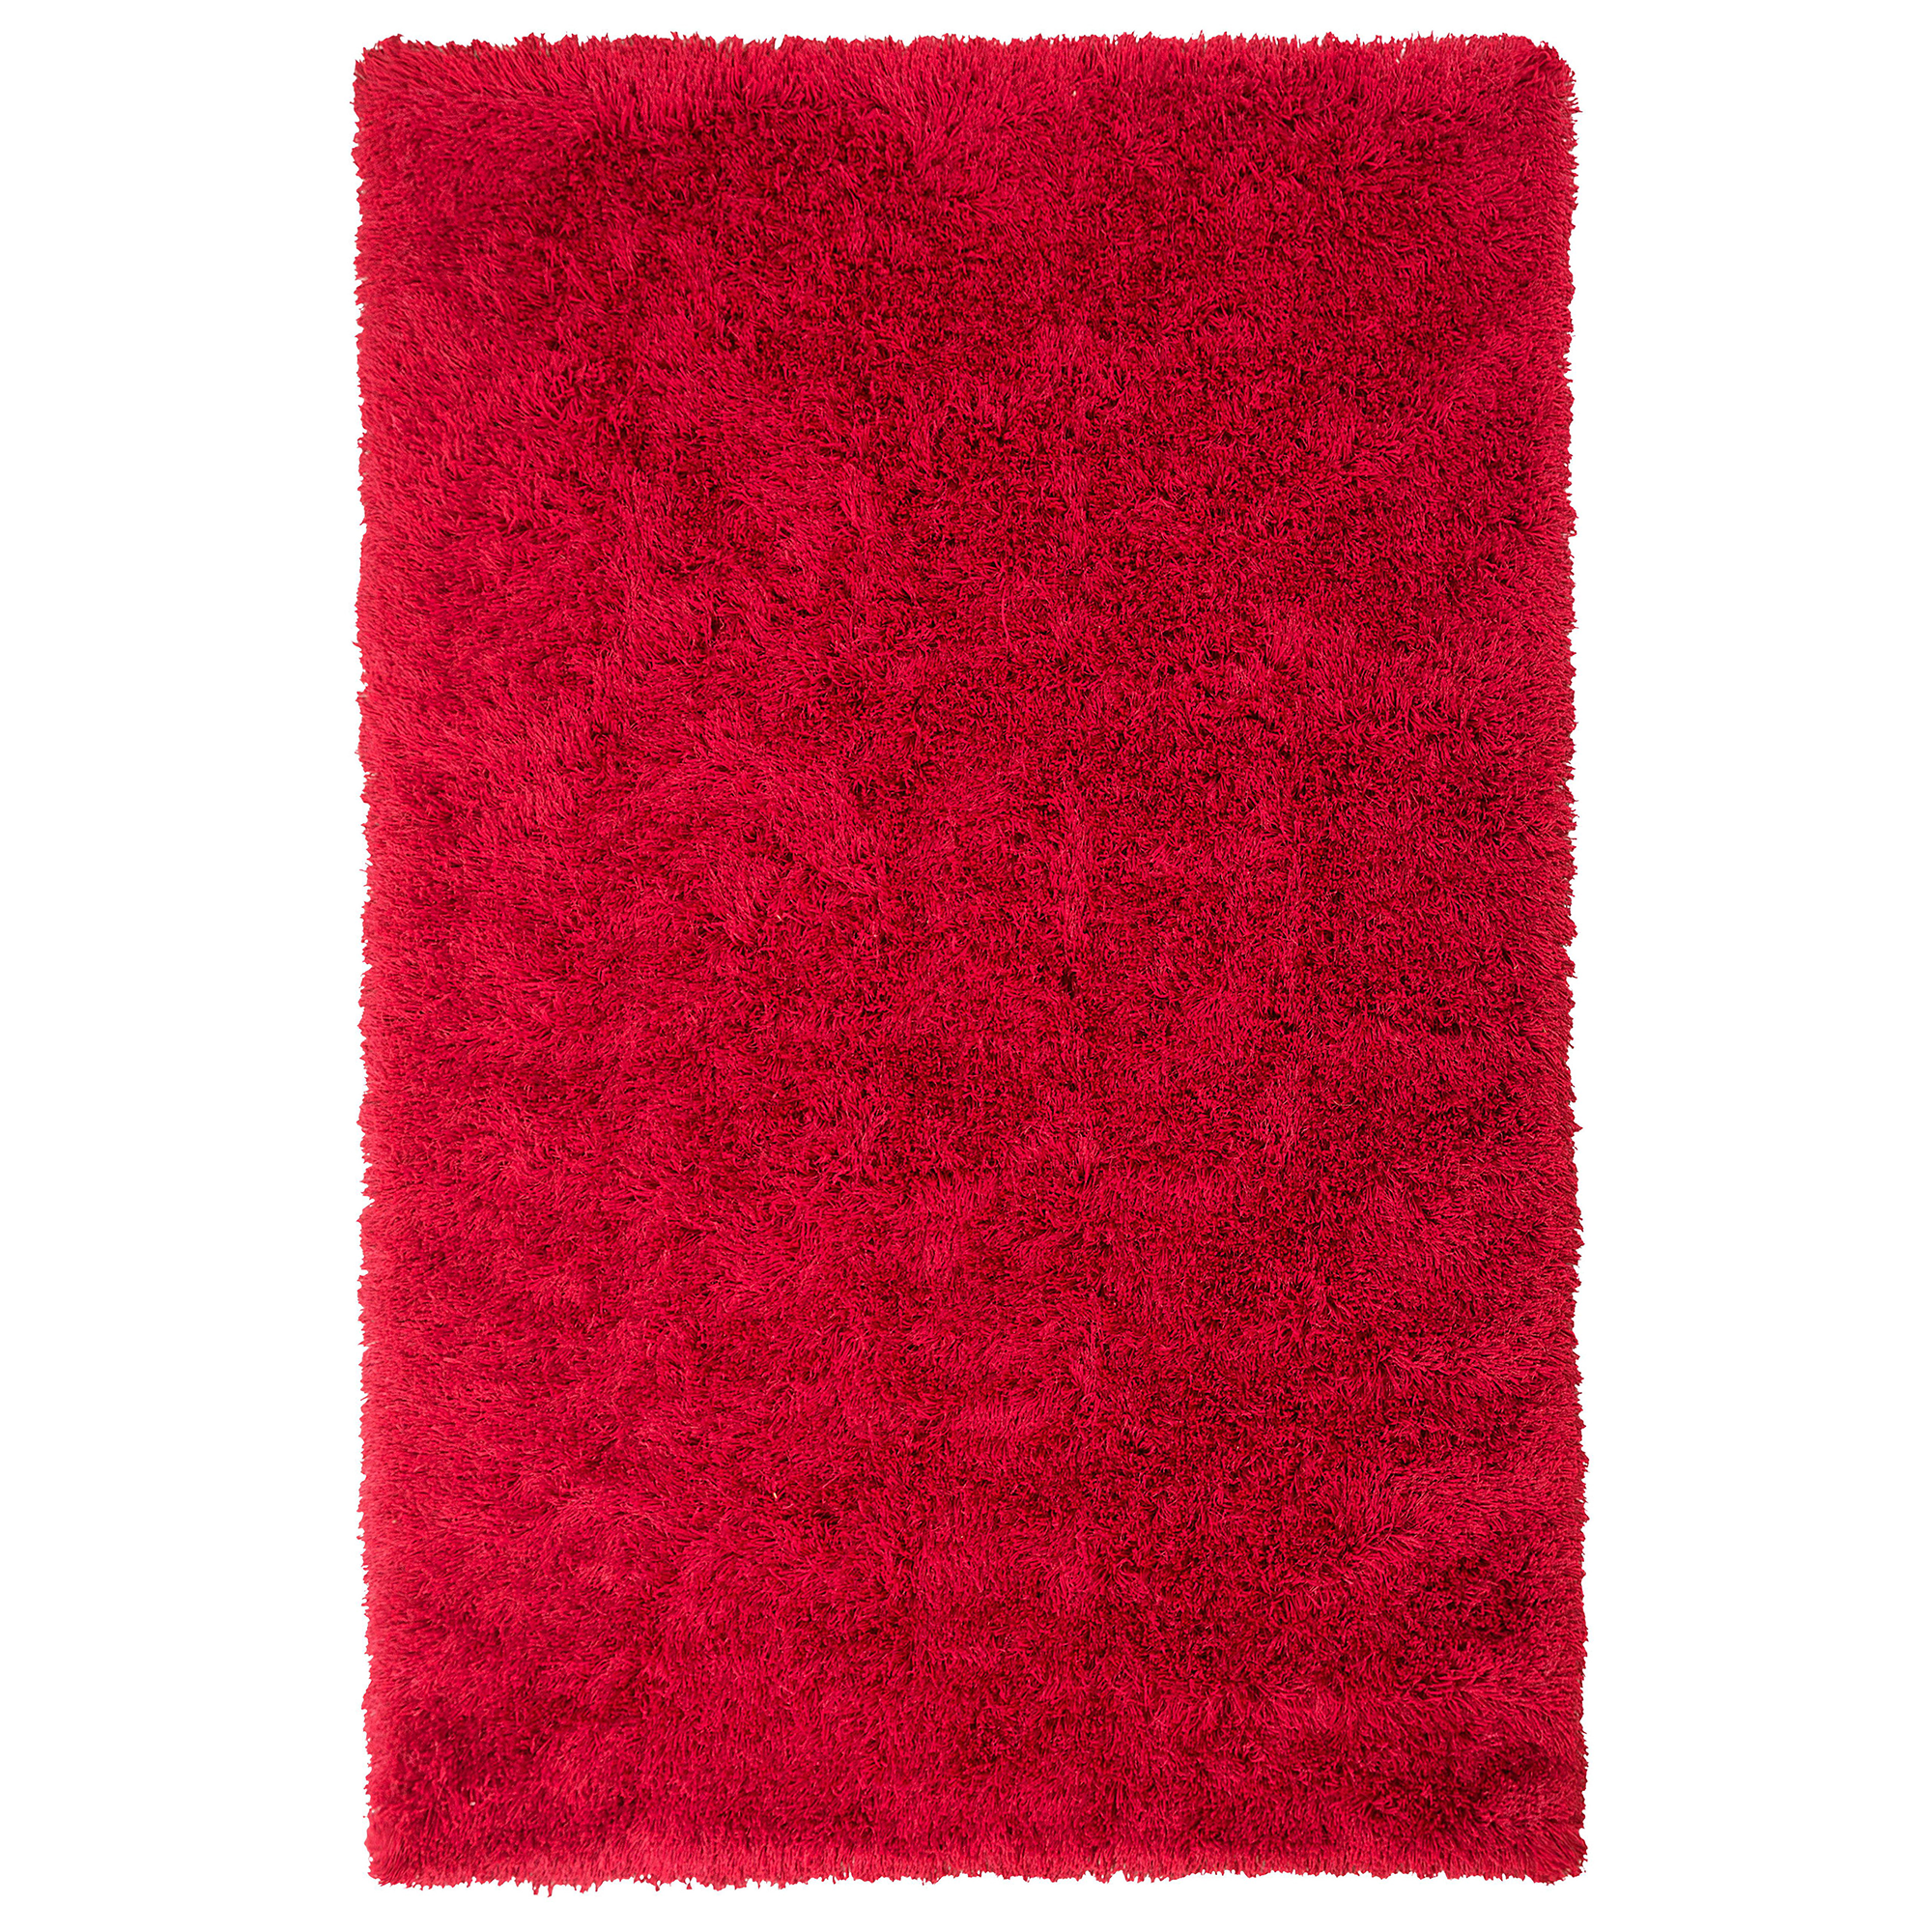 Beliani Shaggy Area Rug High-Pile Carpet Solid Red Polyester Rectangular 200 x 300 cm